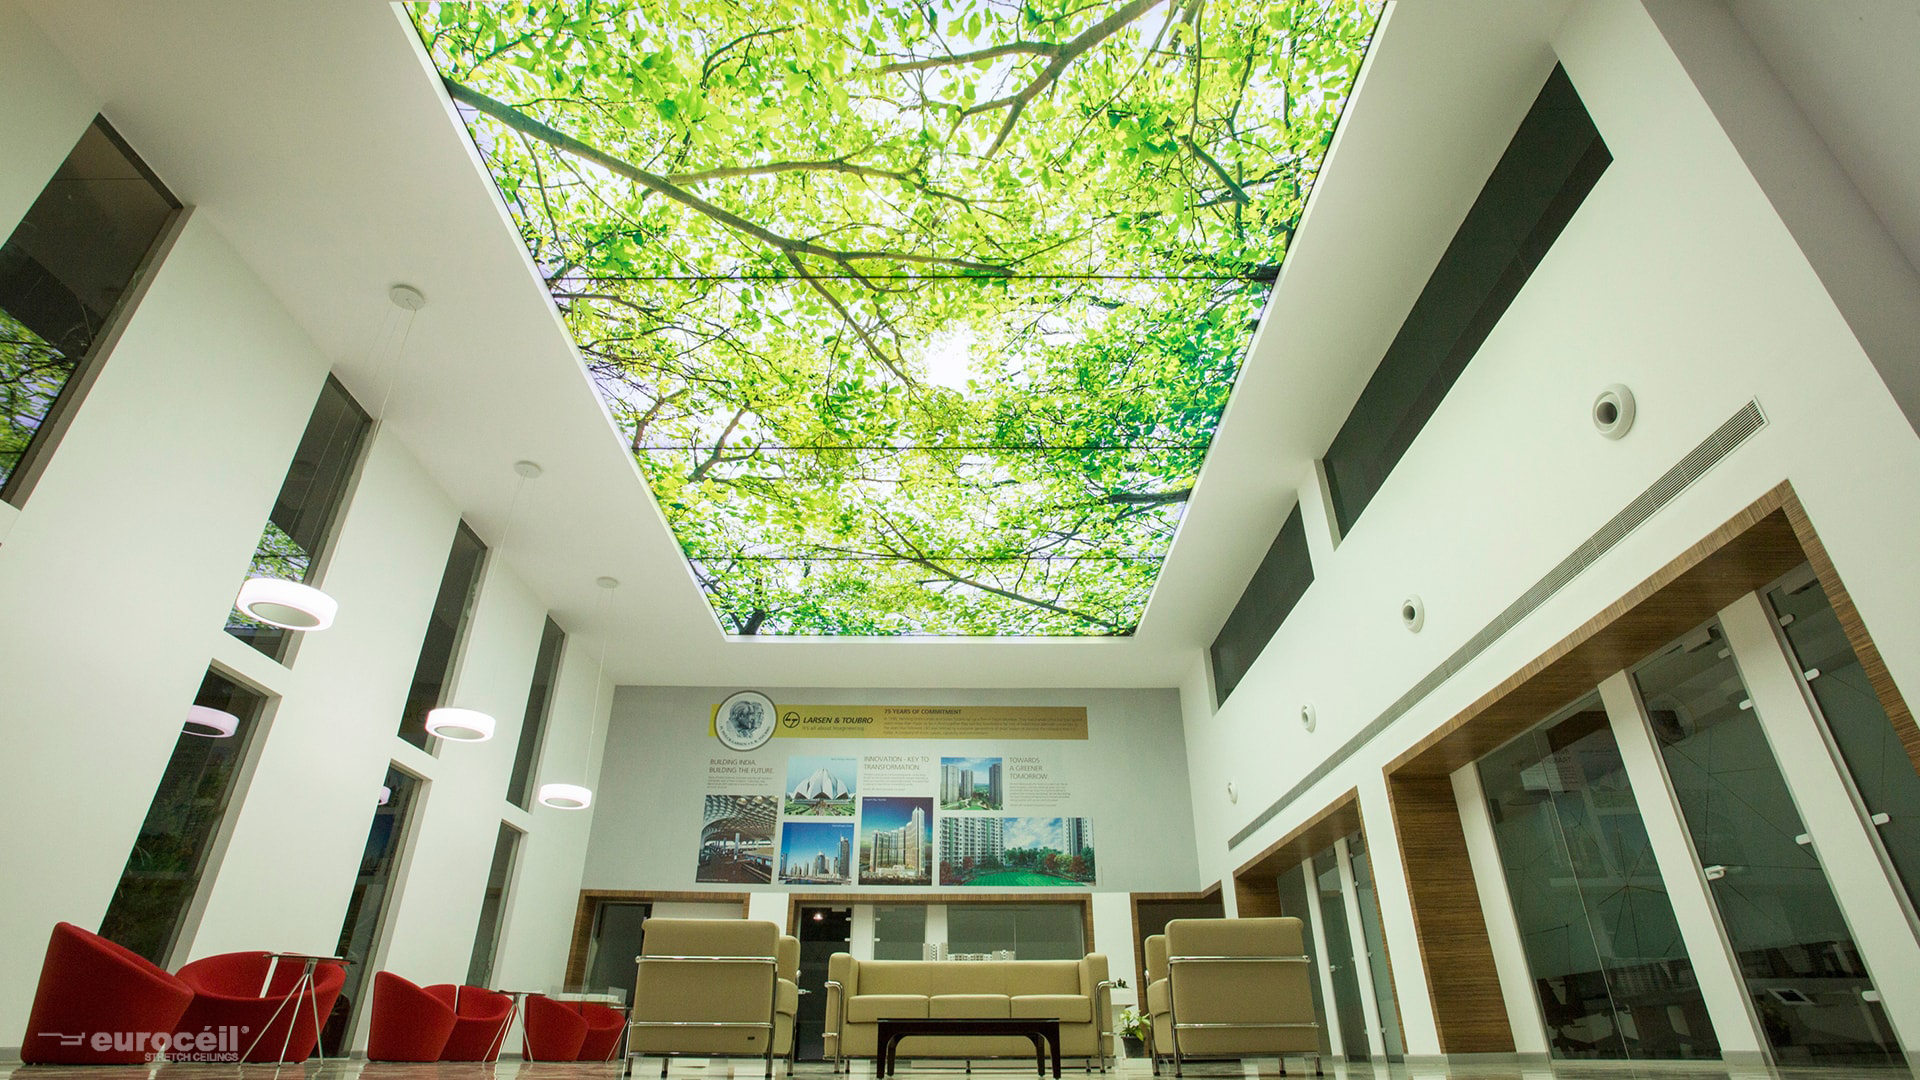 L&T - Stretch Ceiling Printed Translucent with Backlighting in Corporate - Corporate - Bangalore